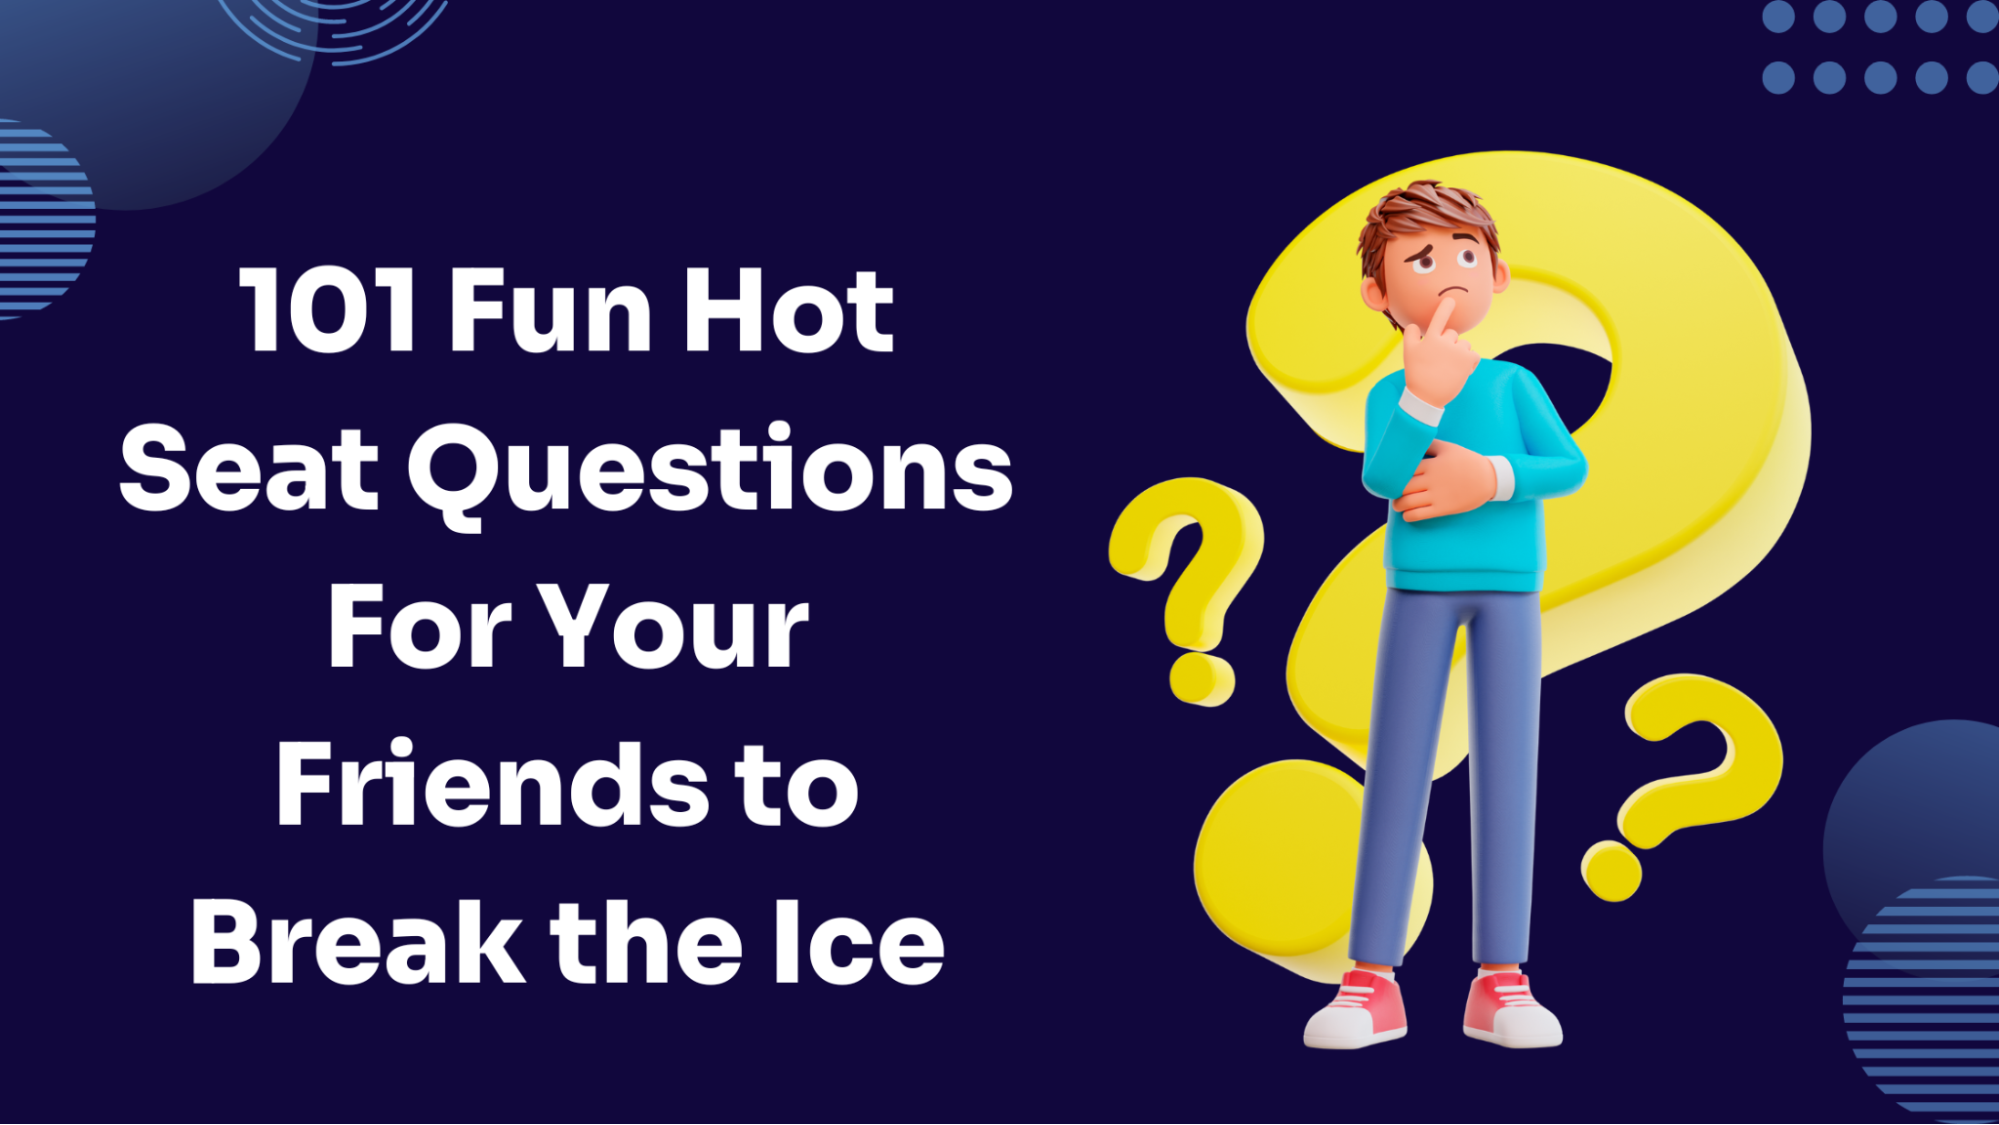 https://aiseo.ai/blog/101%20Fun%20Hot%20Seat%20Questions%20For%20Your%20Friends%20to%20Break%20the%20Ice/images/image6.png